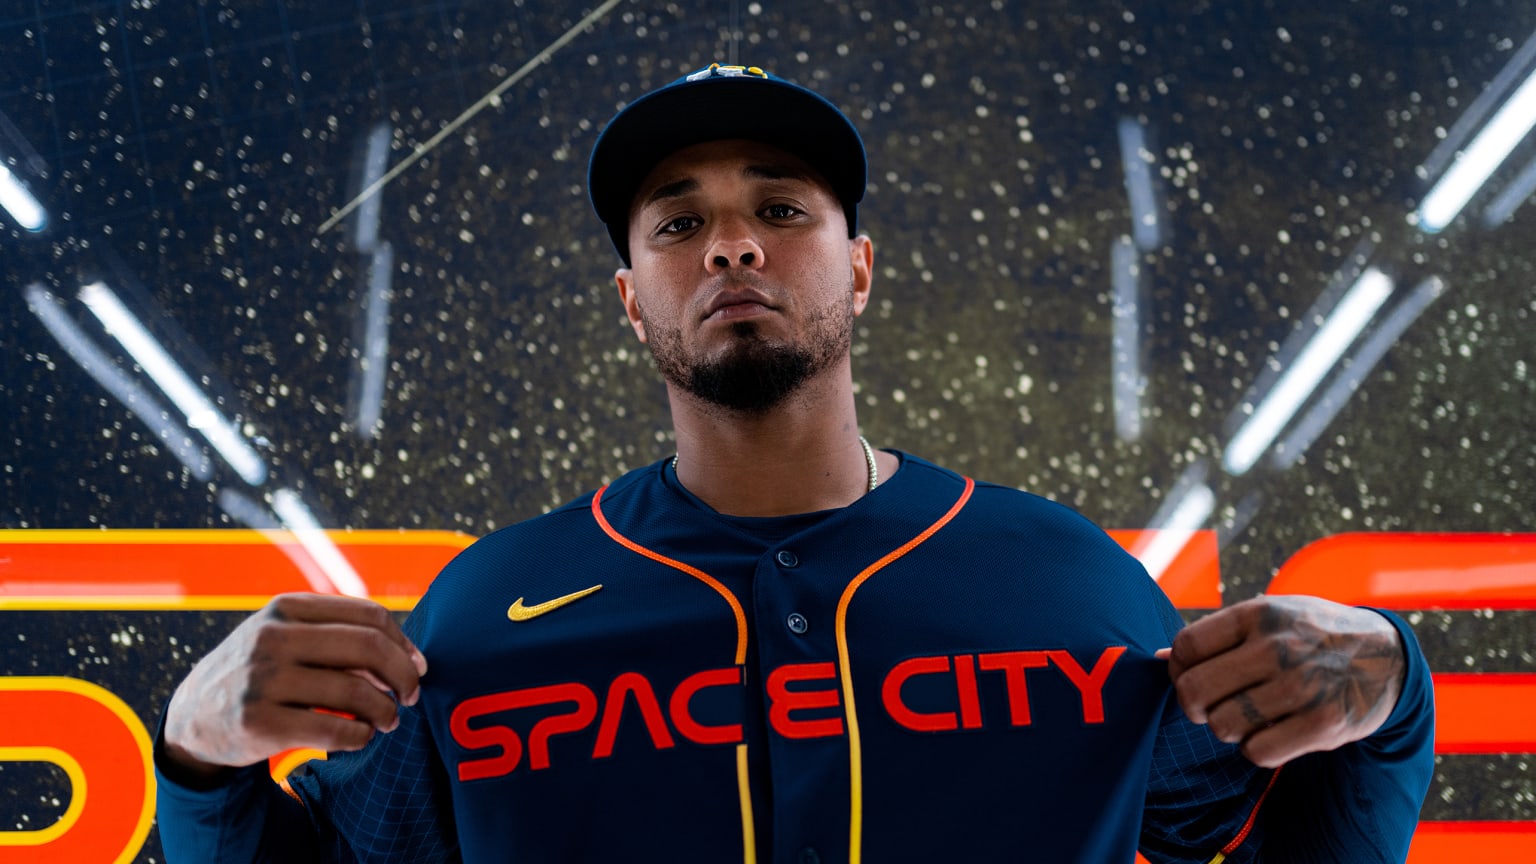 spacecity jersey